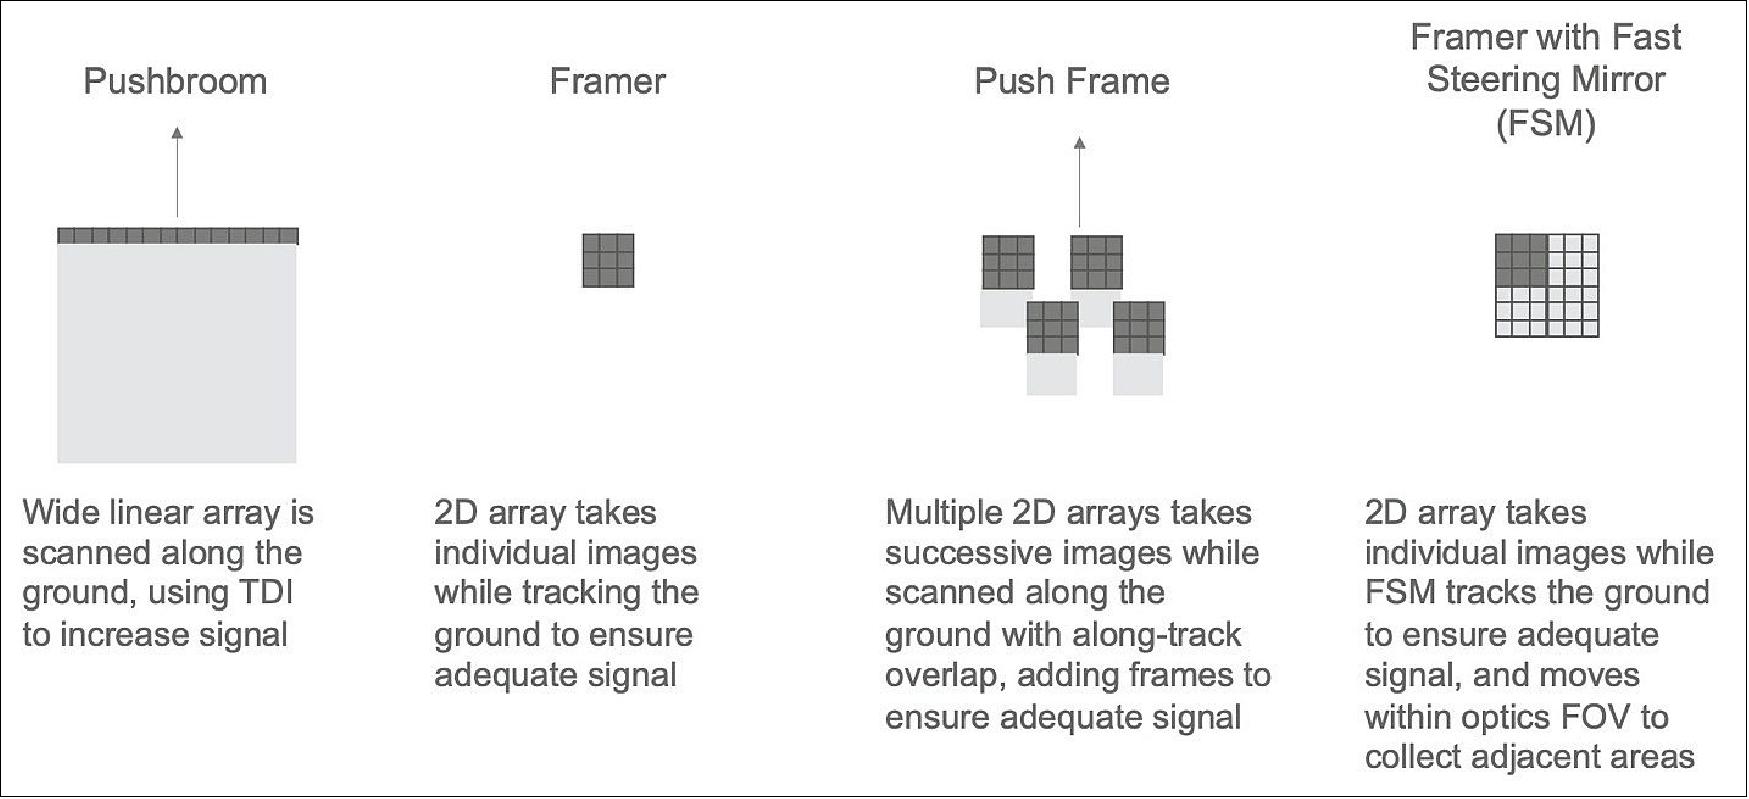 Figure 12: Maxar had to choose between using a pushbroom scanner, which uses a wide linear array, and one of several approaches that utilize large format 2D staring arrays (image credit: Maxar)